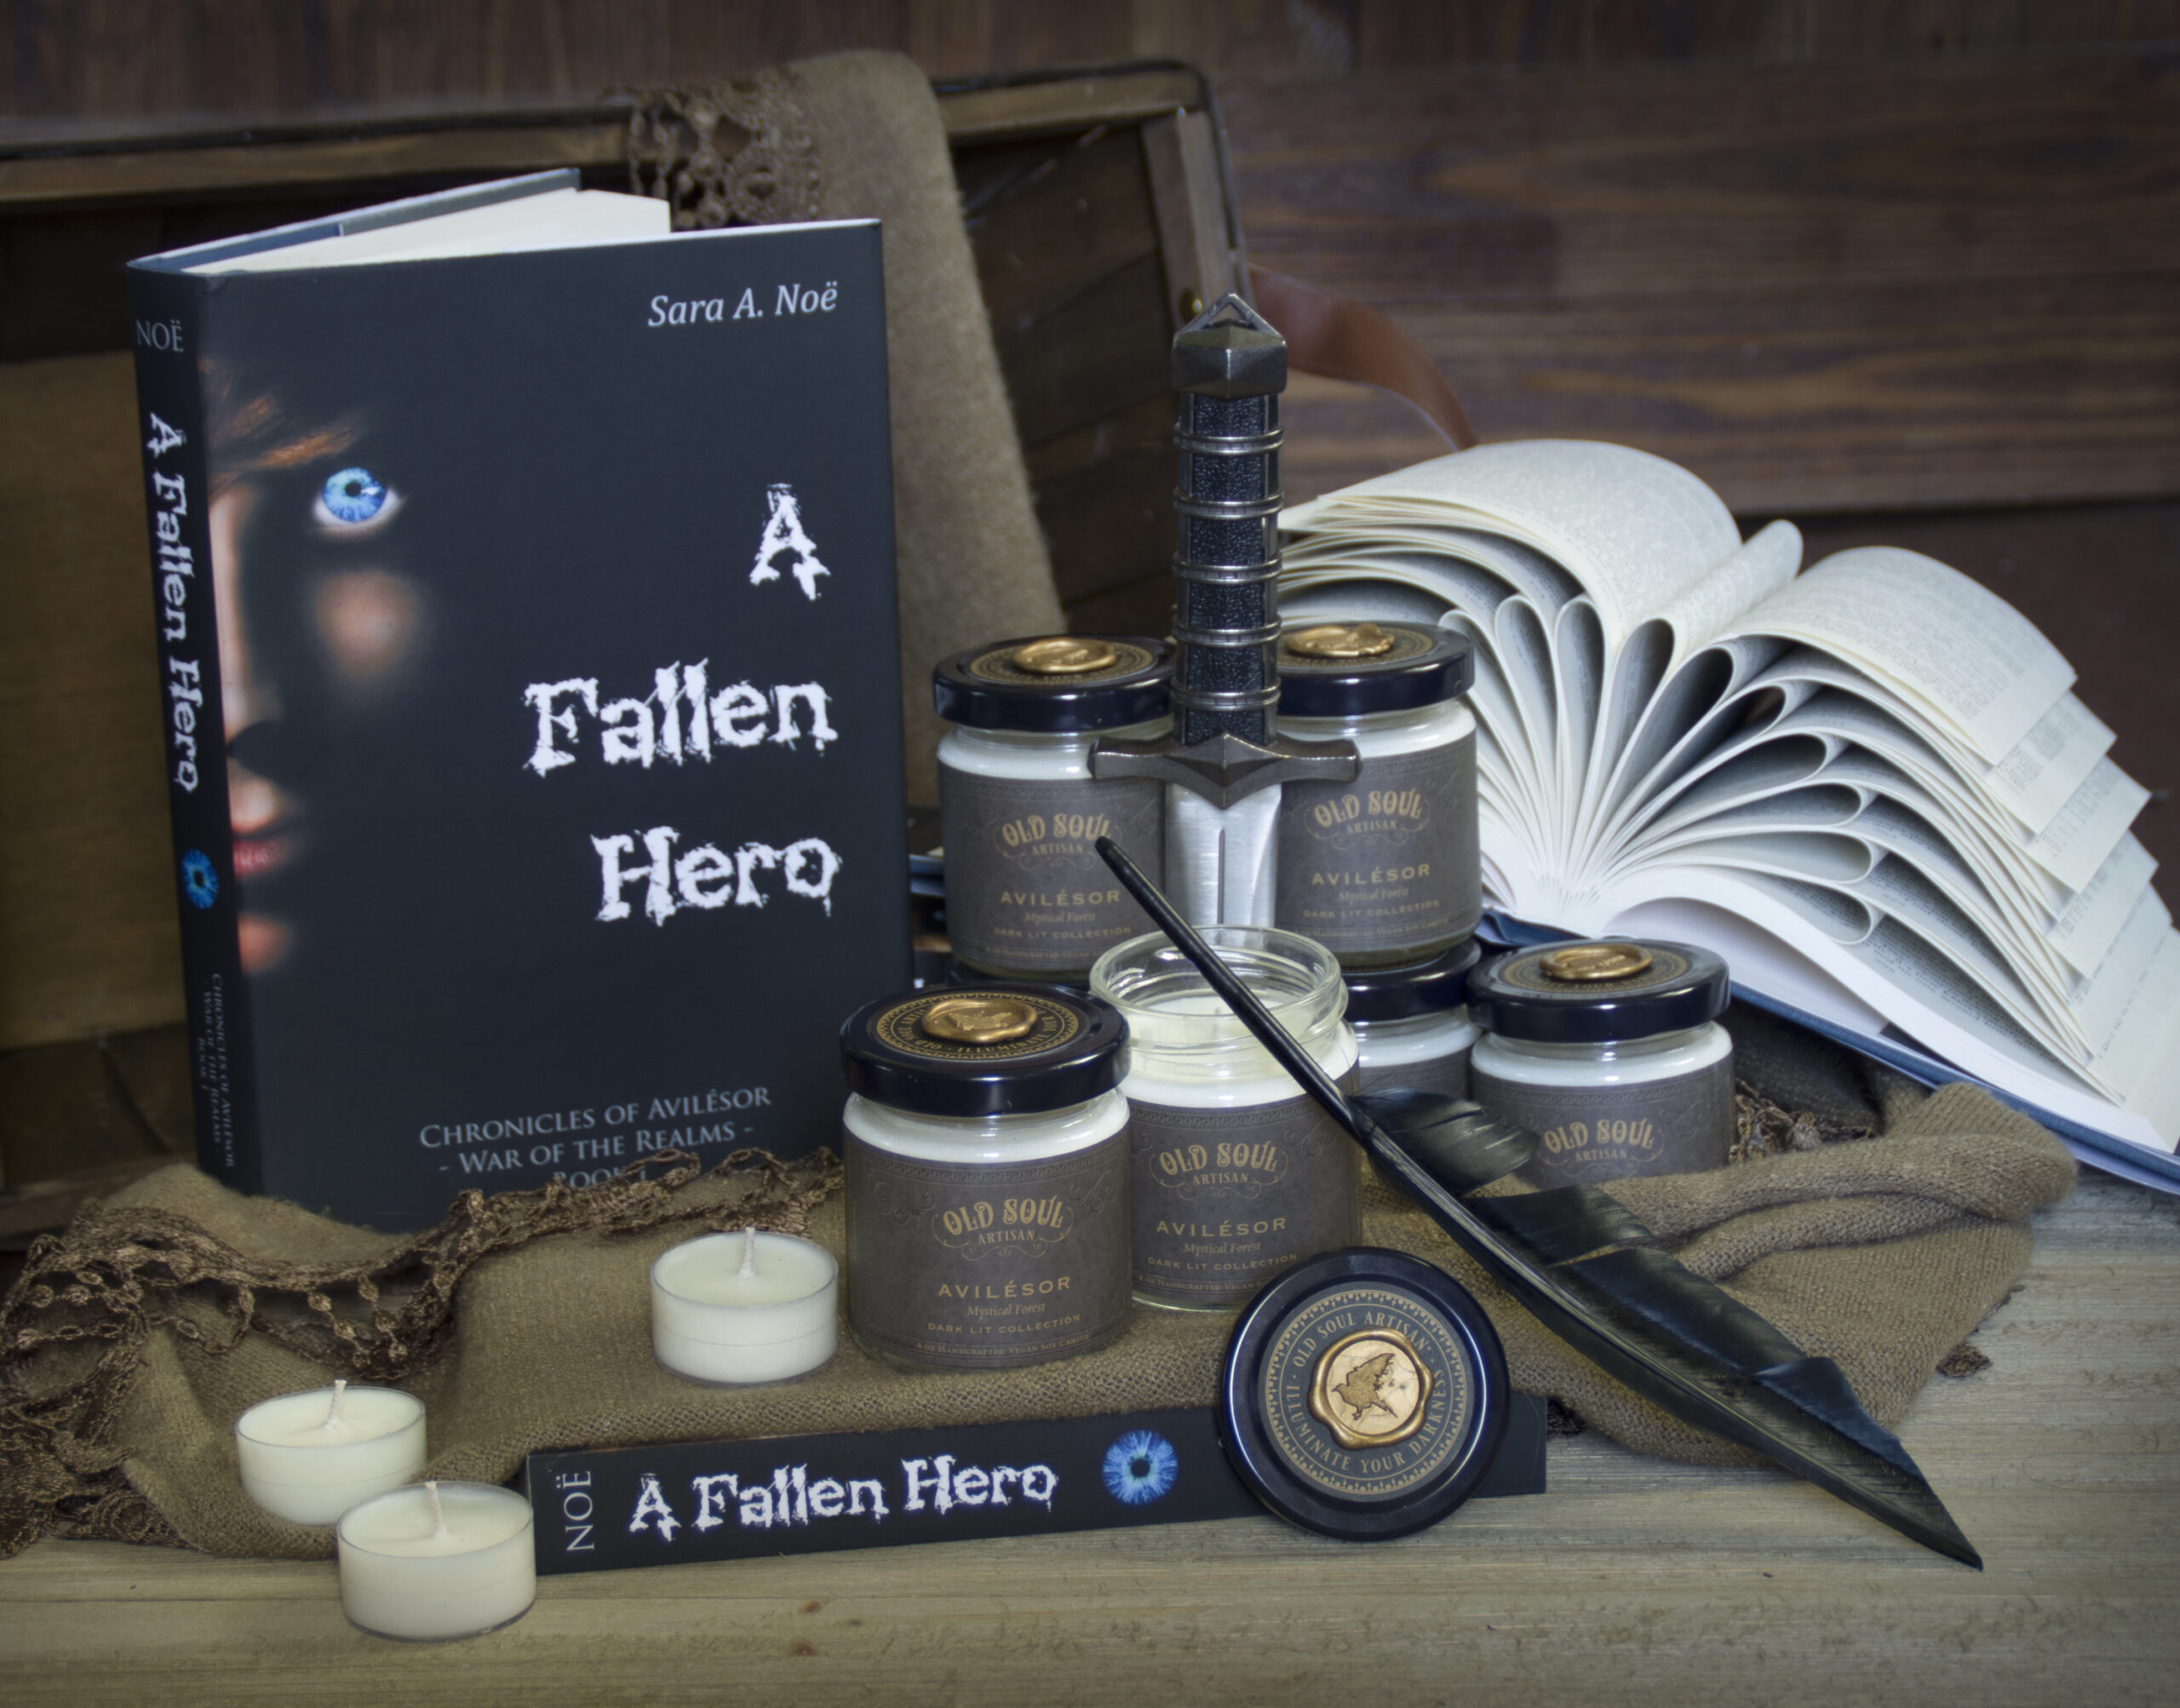 War of the Realms: A Fallen Hero by Sara A. Noe with Old Soul Artisan Avilesor candle